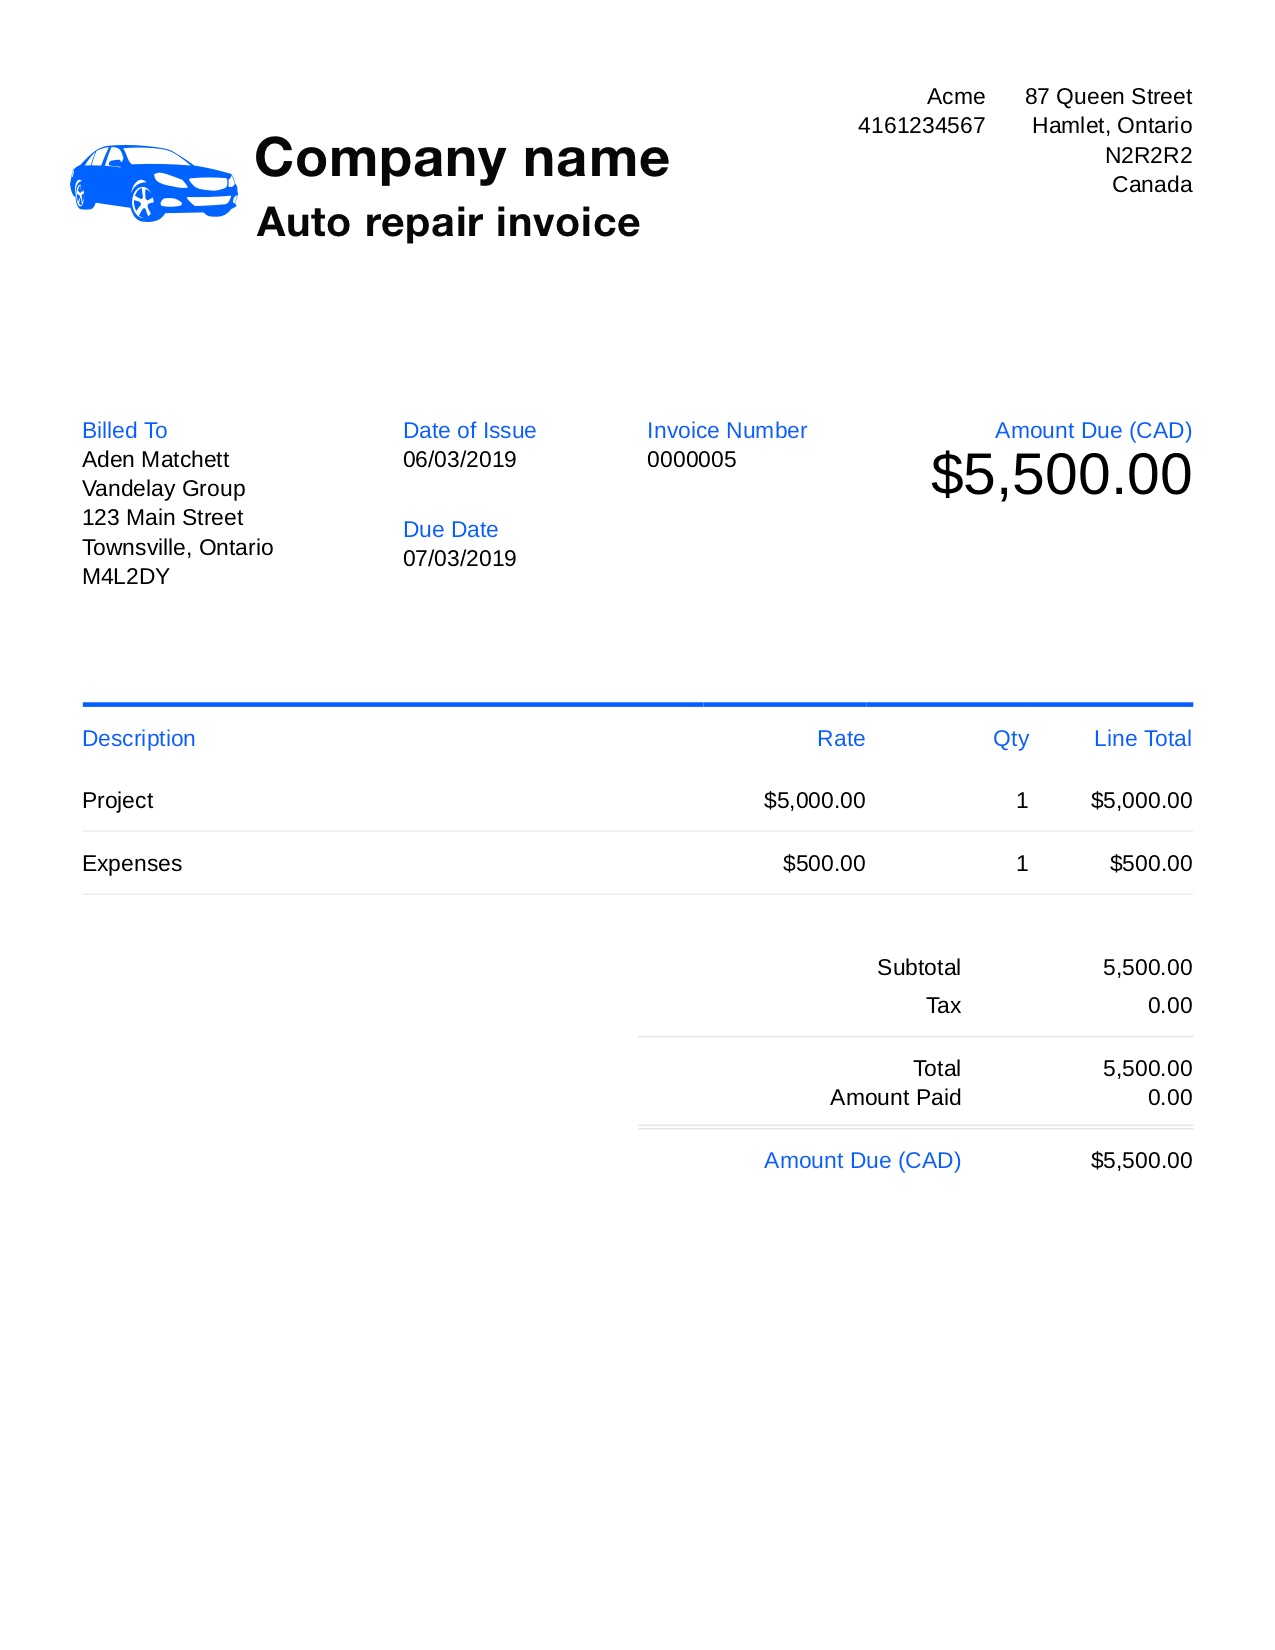 Free Auto Repair Invoice Template. Customize and Send in 23 Seconds Intended For Car Service Invoice Template Free Download